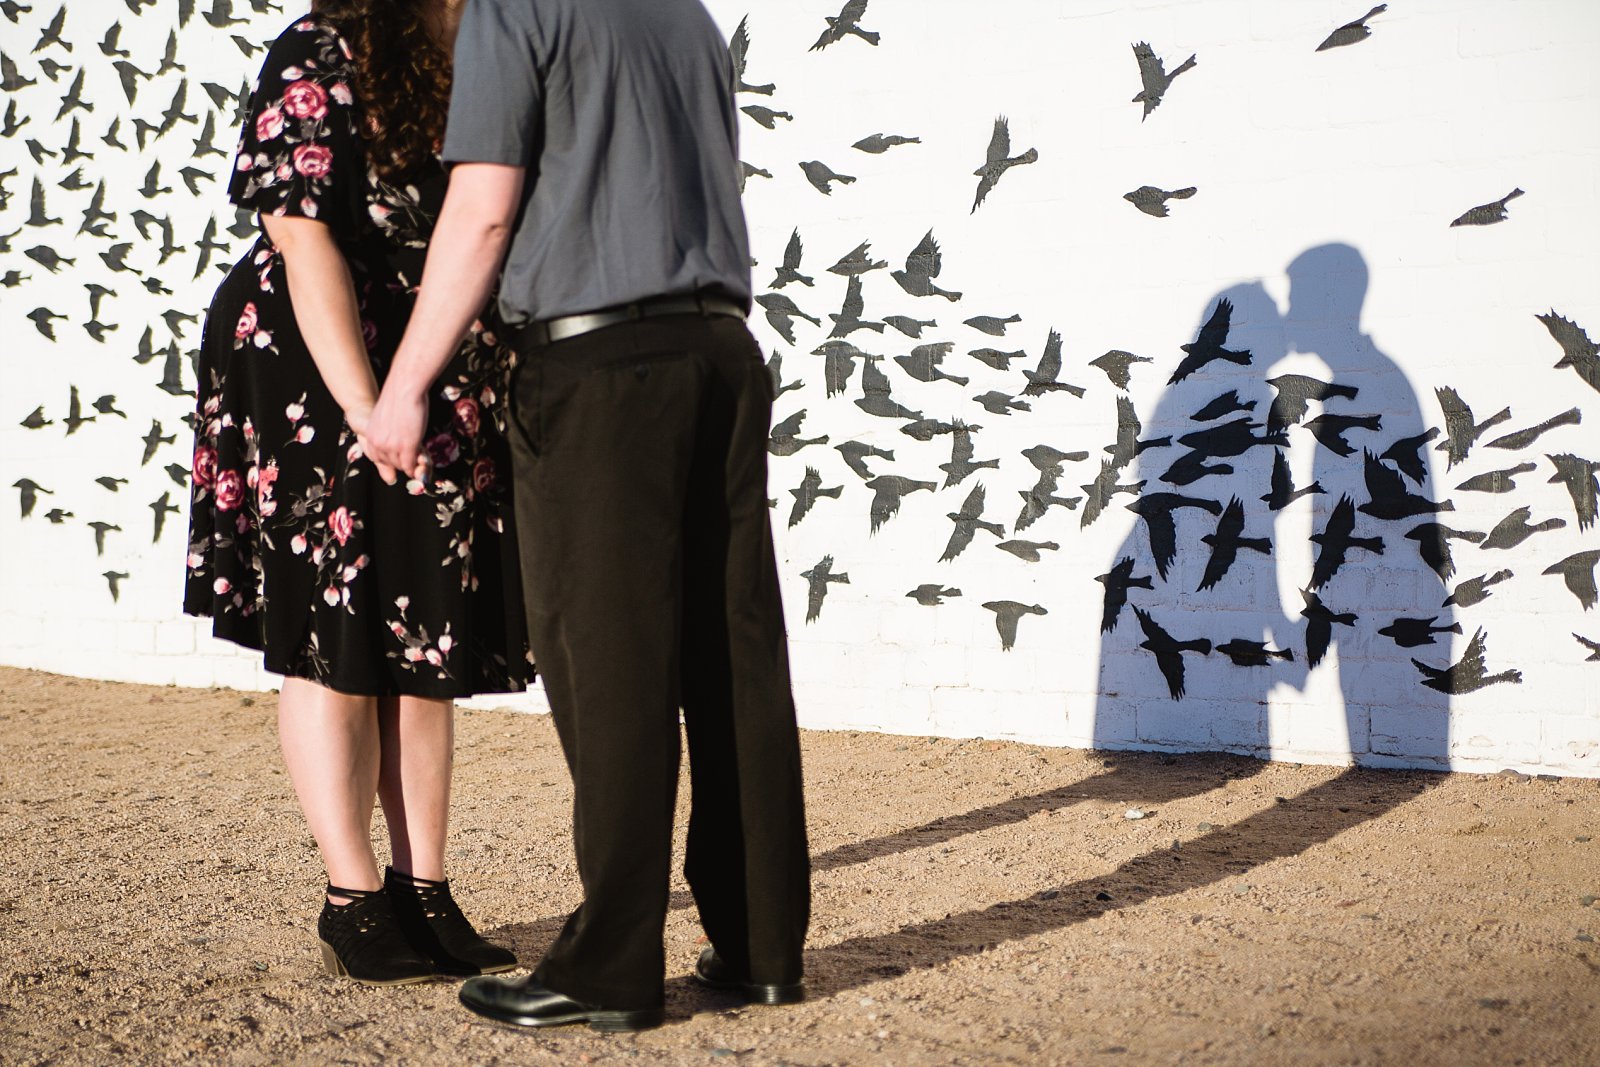 Shadow of couple kissing on an art mural during their Roosevelt Row Art District engagement session by PMA Photography.